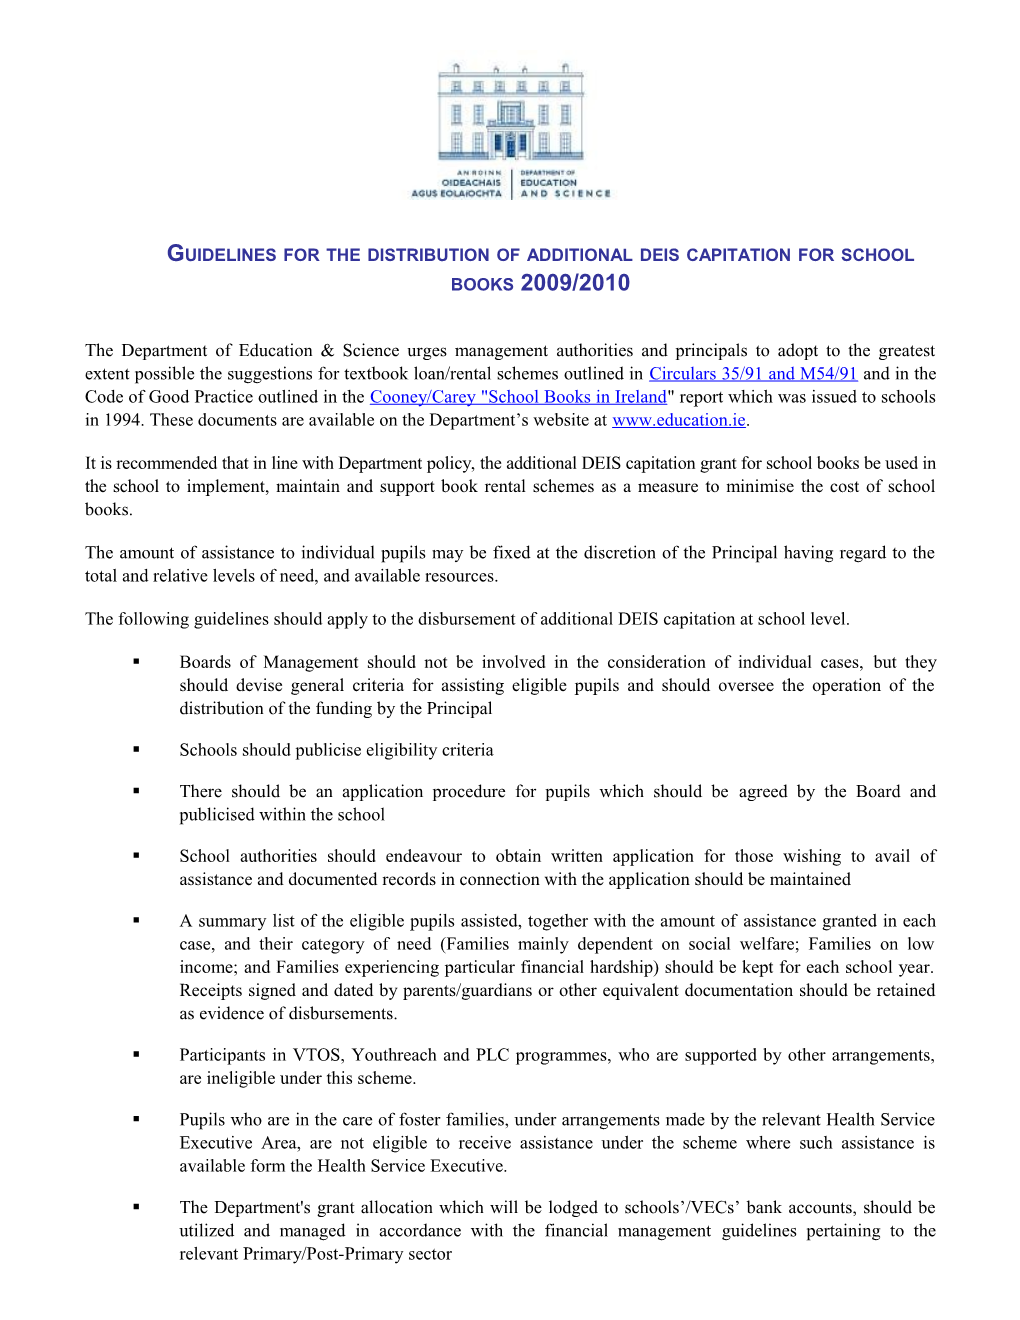 Guidelines for the Distribution of Additional Deis Capitation for School Books 2009/2010